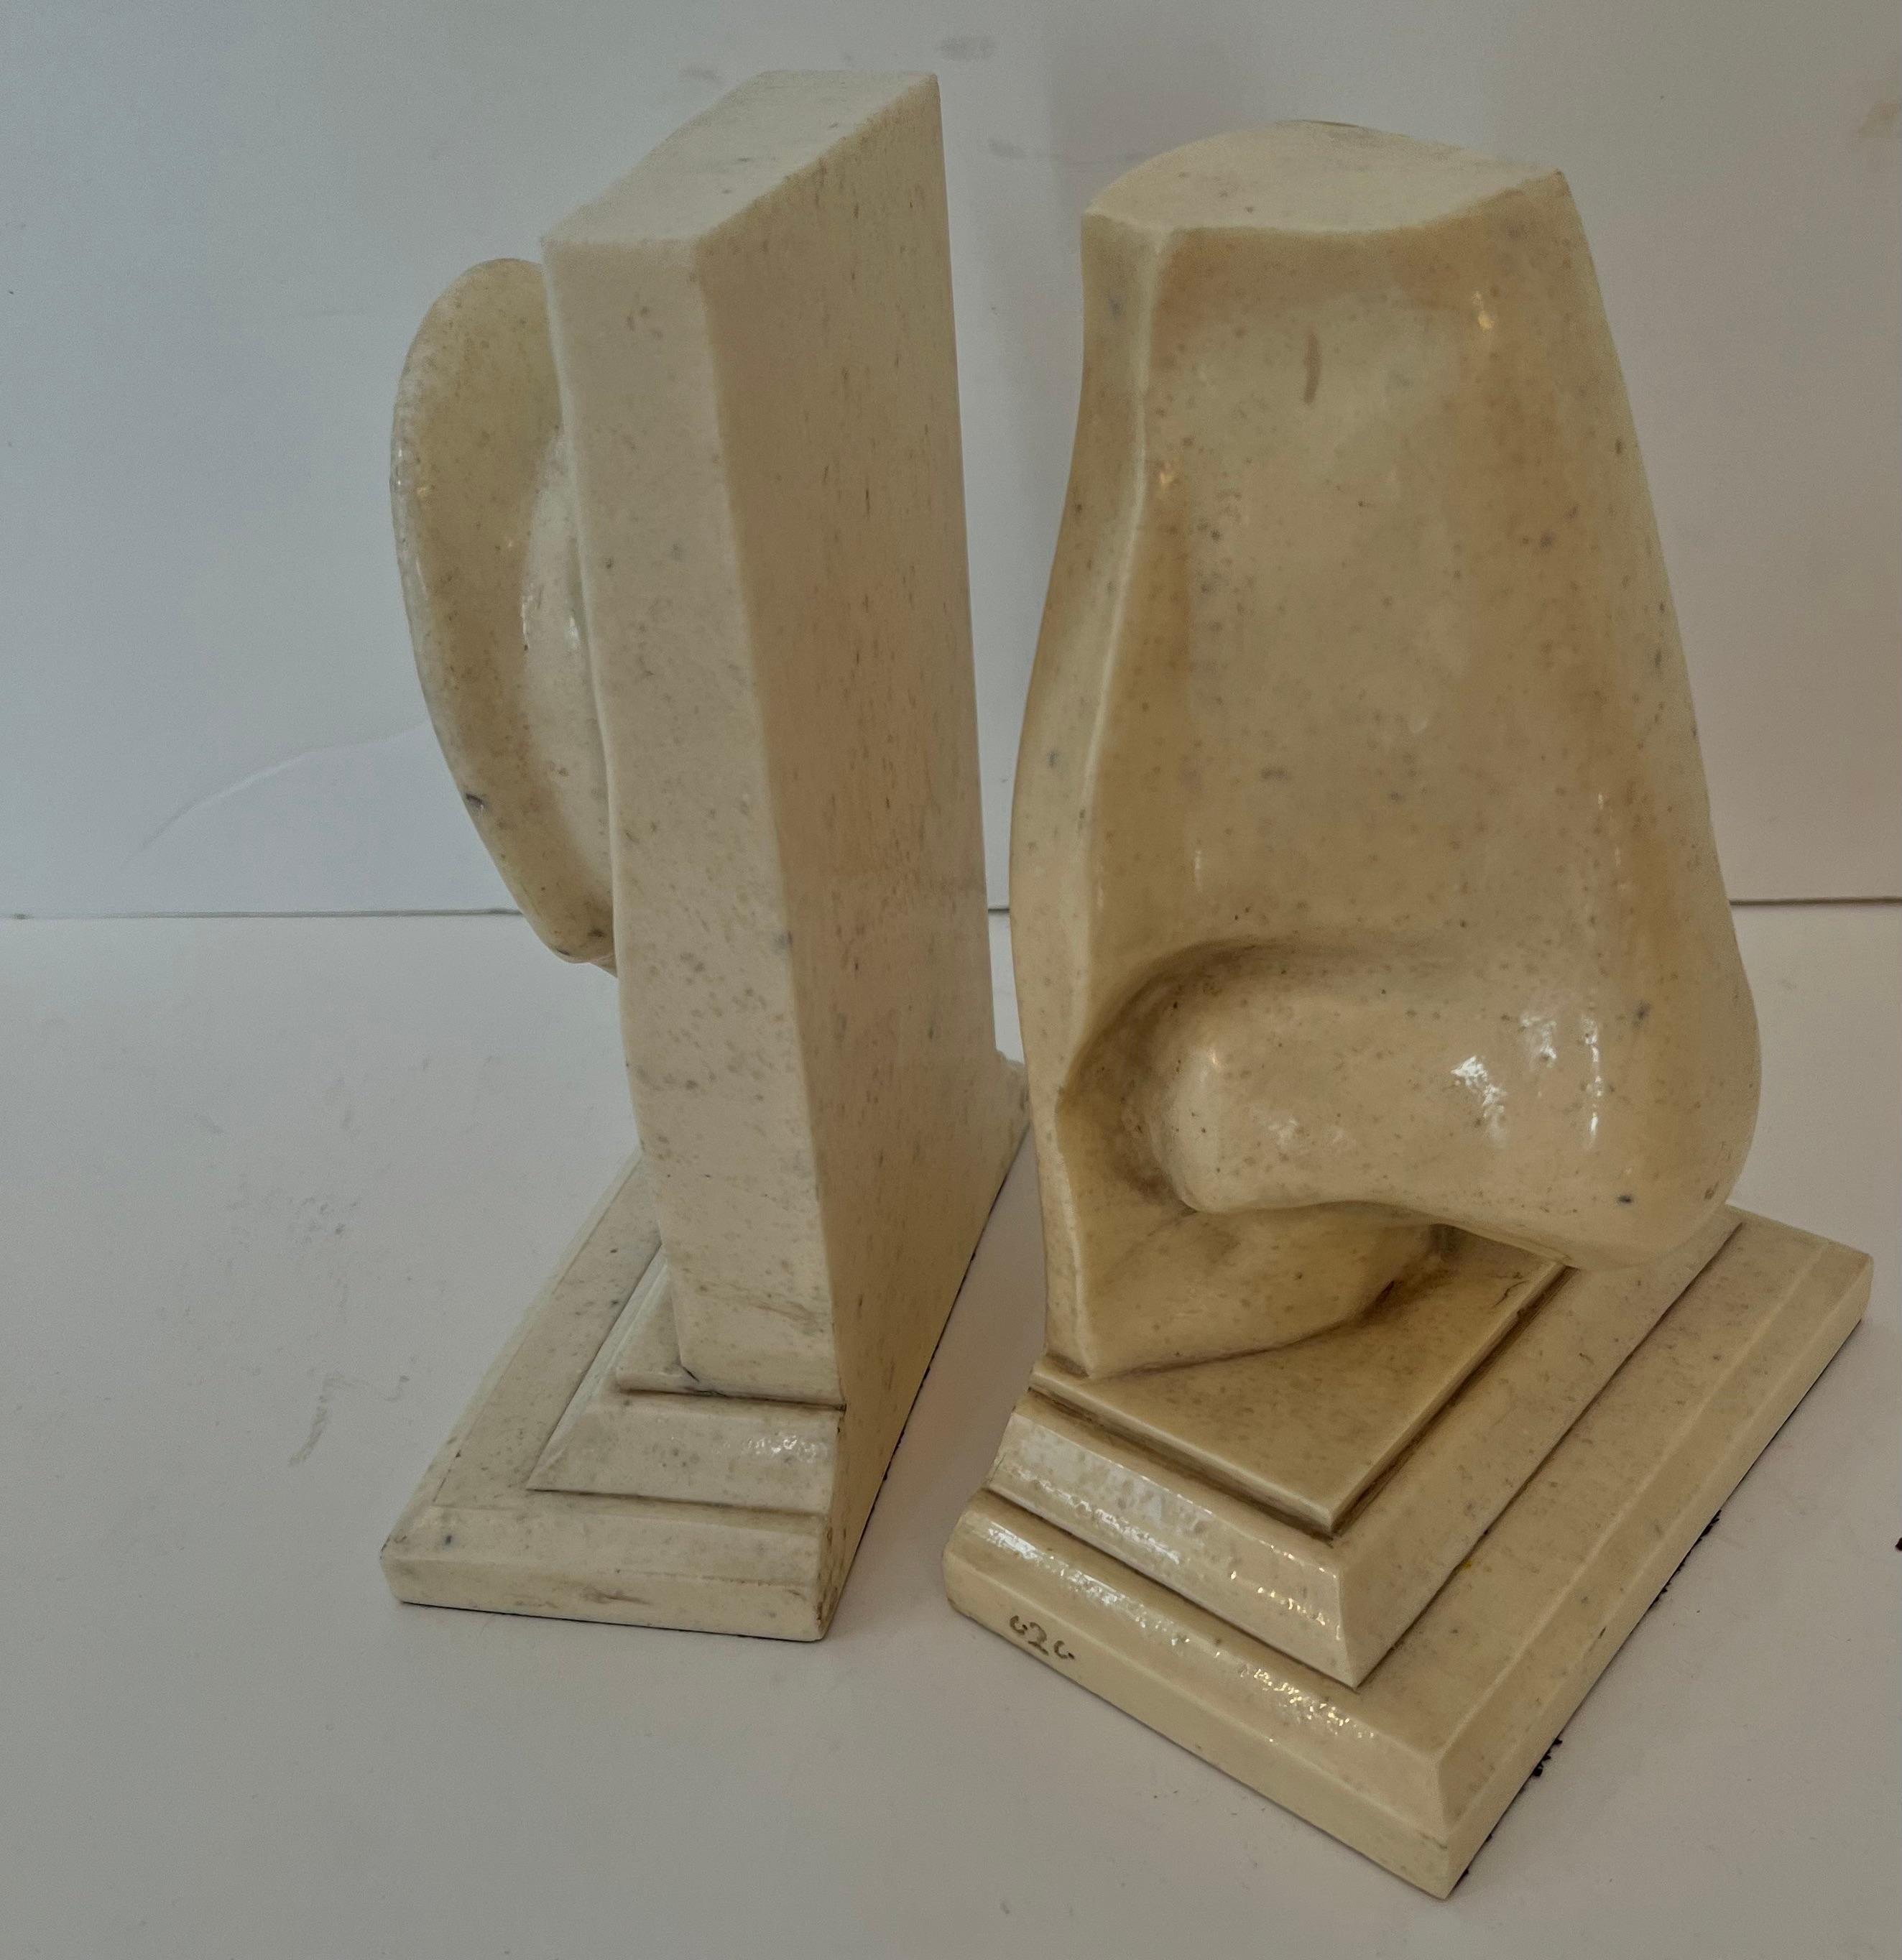 A wonderful pair of iconic C2 Design bookends. The pair combine a combination pop Nose and Ear. The resin has a stone look and are very popular. The pair are large and very impressive on a shelf or work station. If you are an ENT then they are the